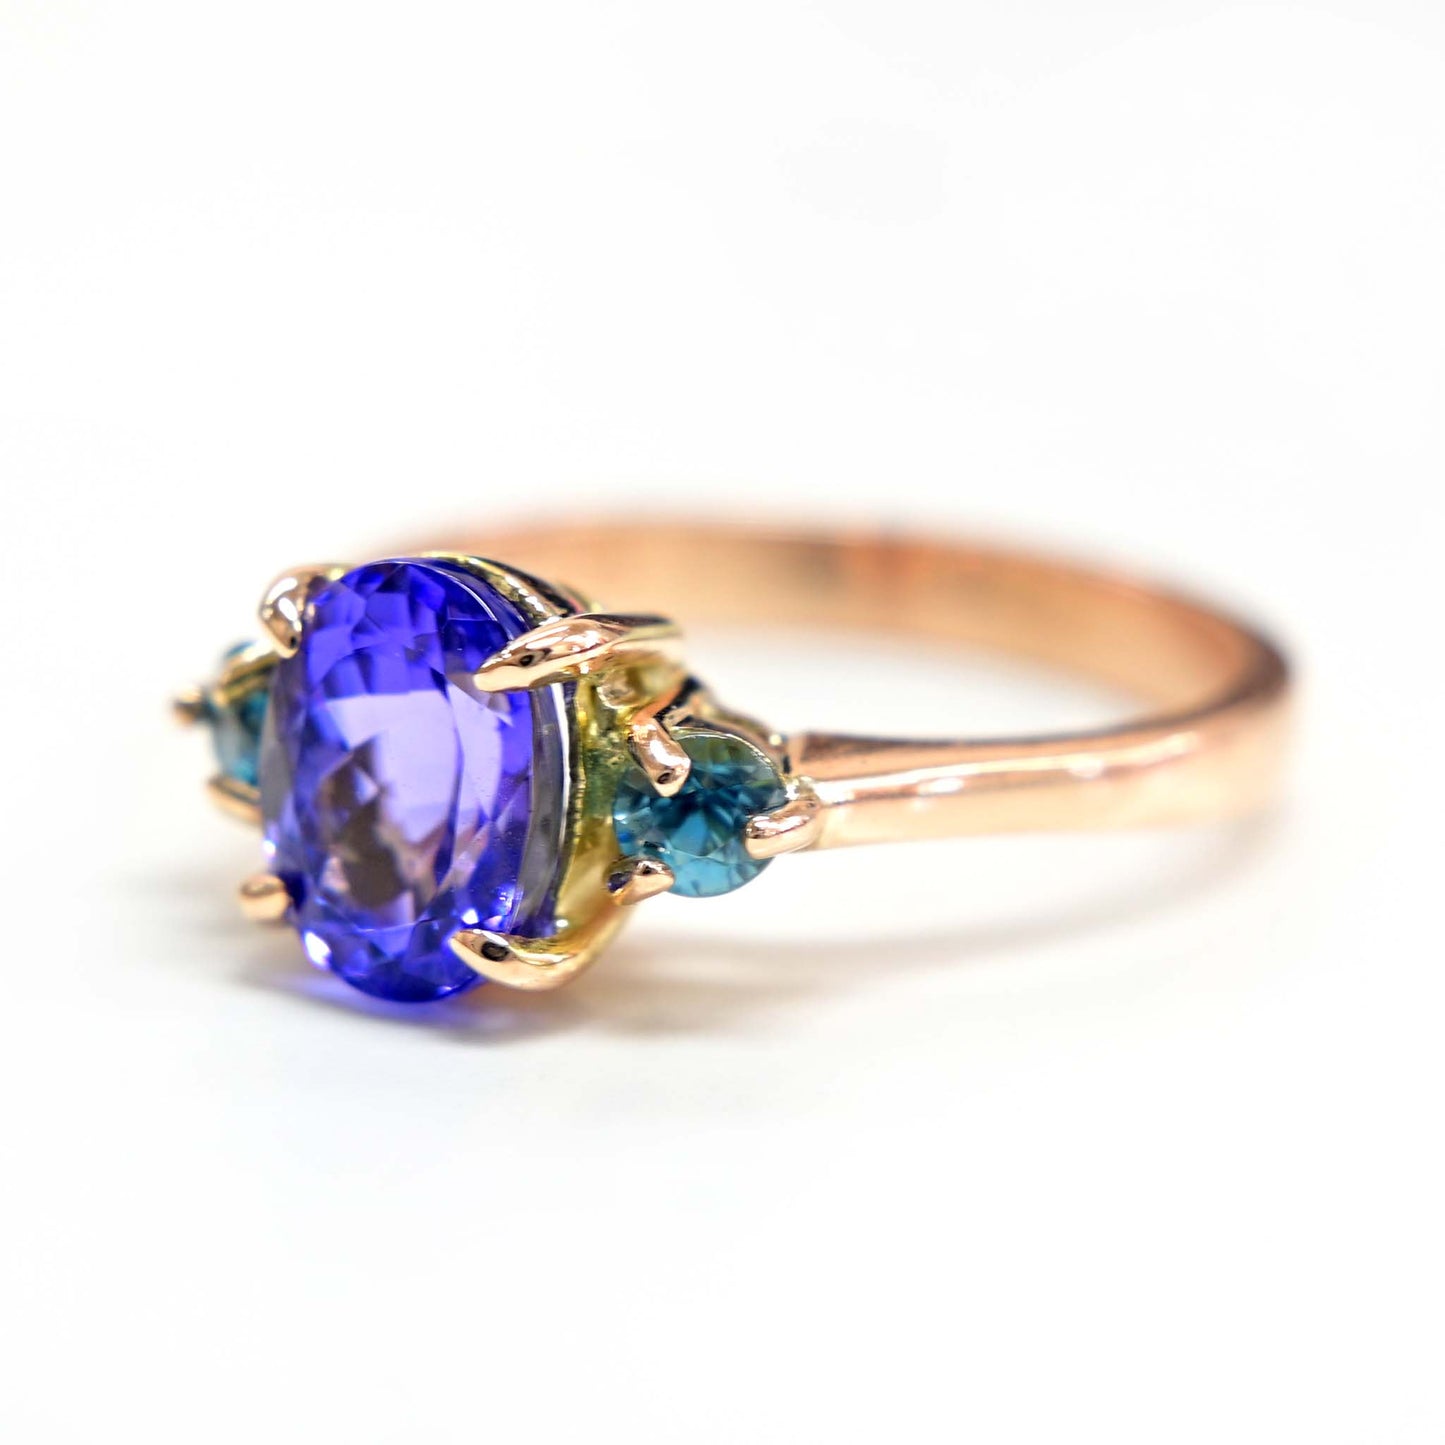 Rapid delivery available for this Tanzanite ring